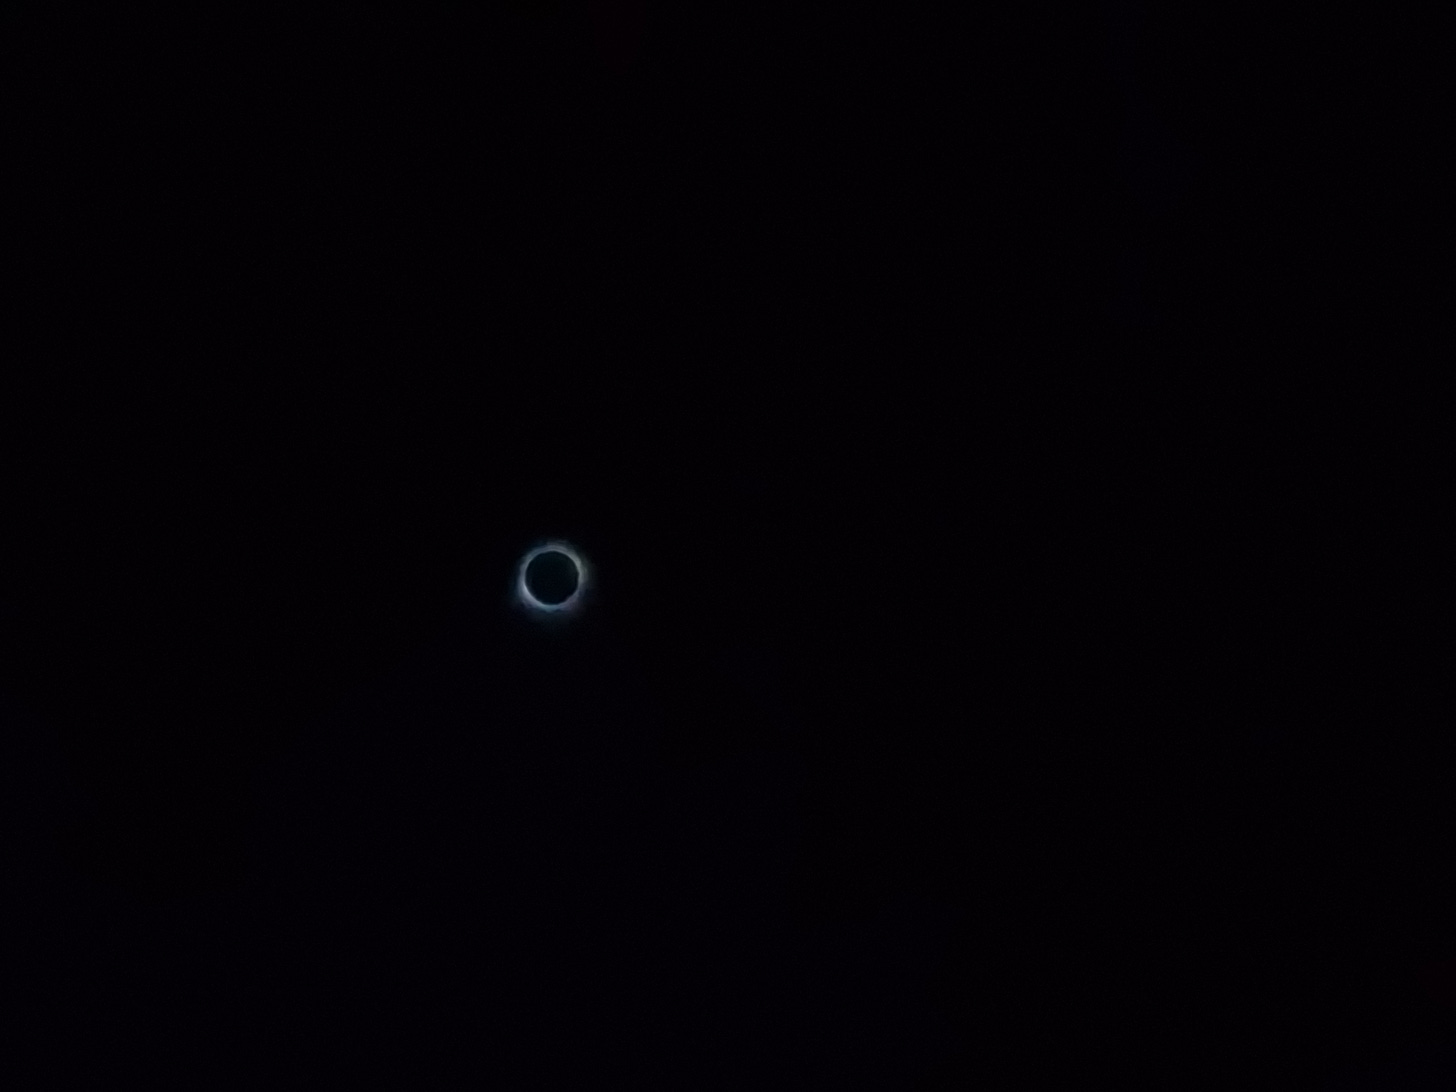 An image of a total solar eclipse